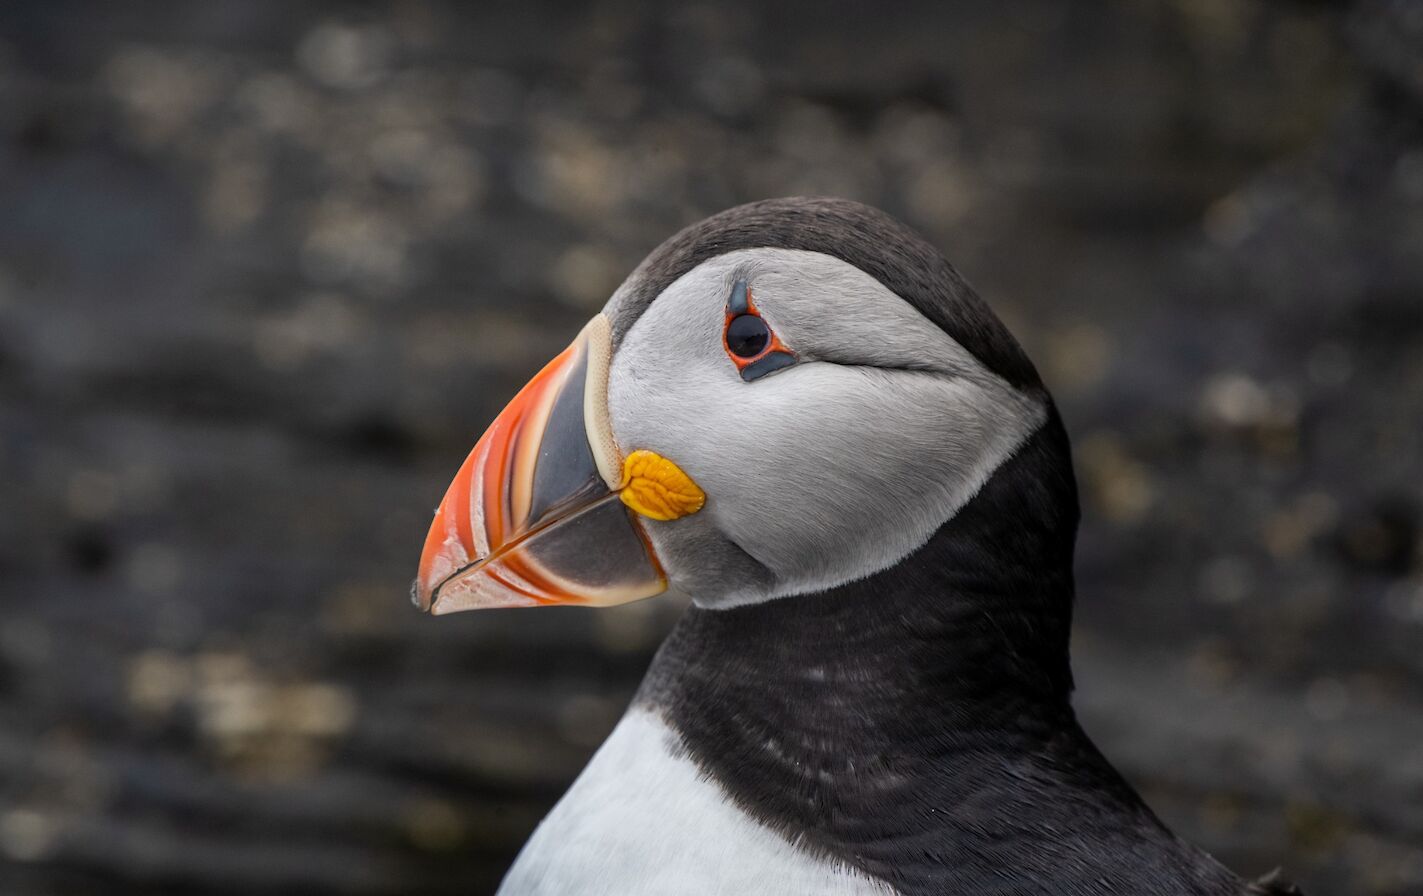 Puffin in Orkney - image by Raymond Besant